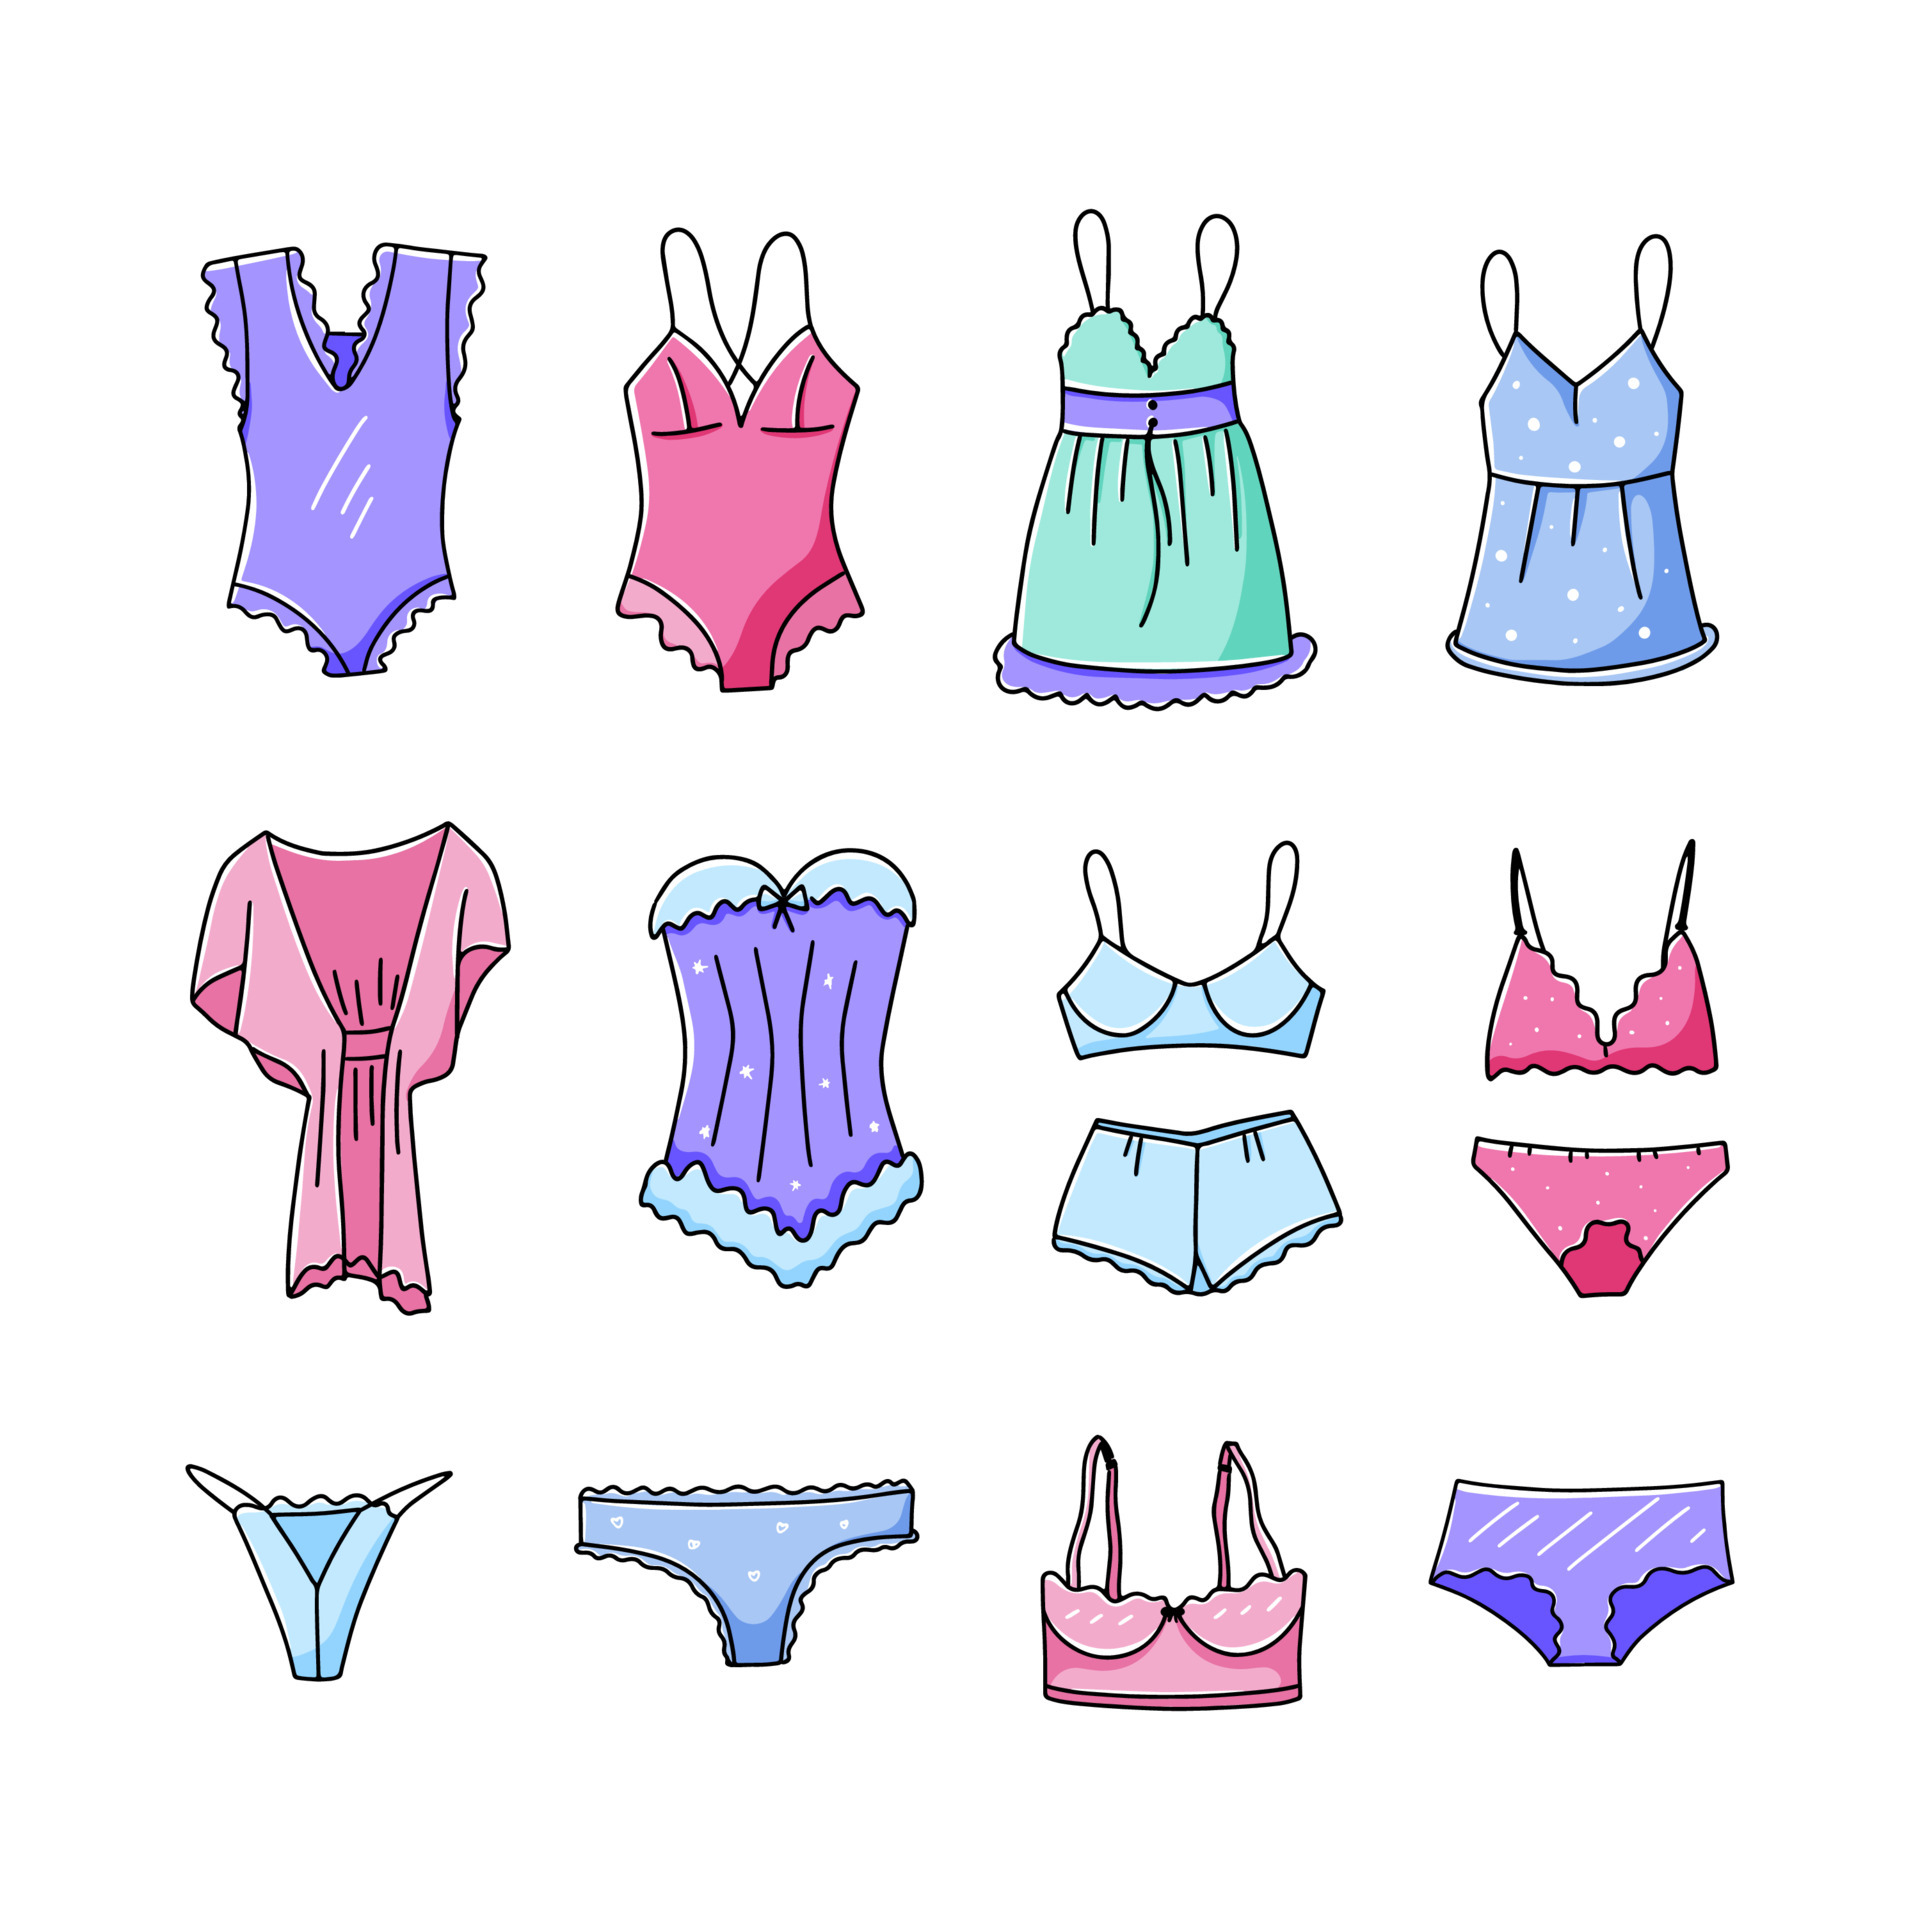 https://static.vecteezy.com/system/resources/previews/005/658/466/original/lingerie-collection-sexy-underwear-and-loungewear-lounge-lingerie-set-of-hand-drawn-elements-illustration-in-doodle-style-vector.jpg